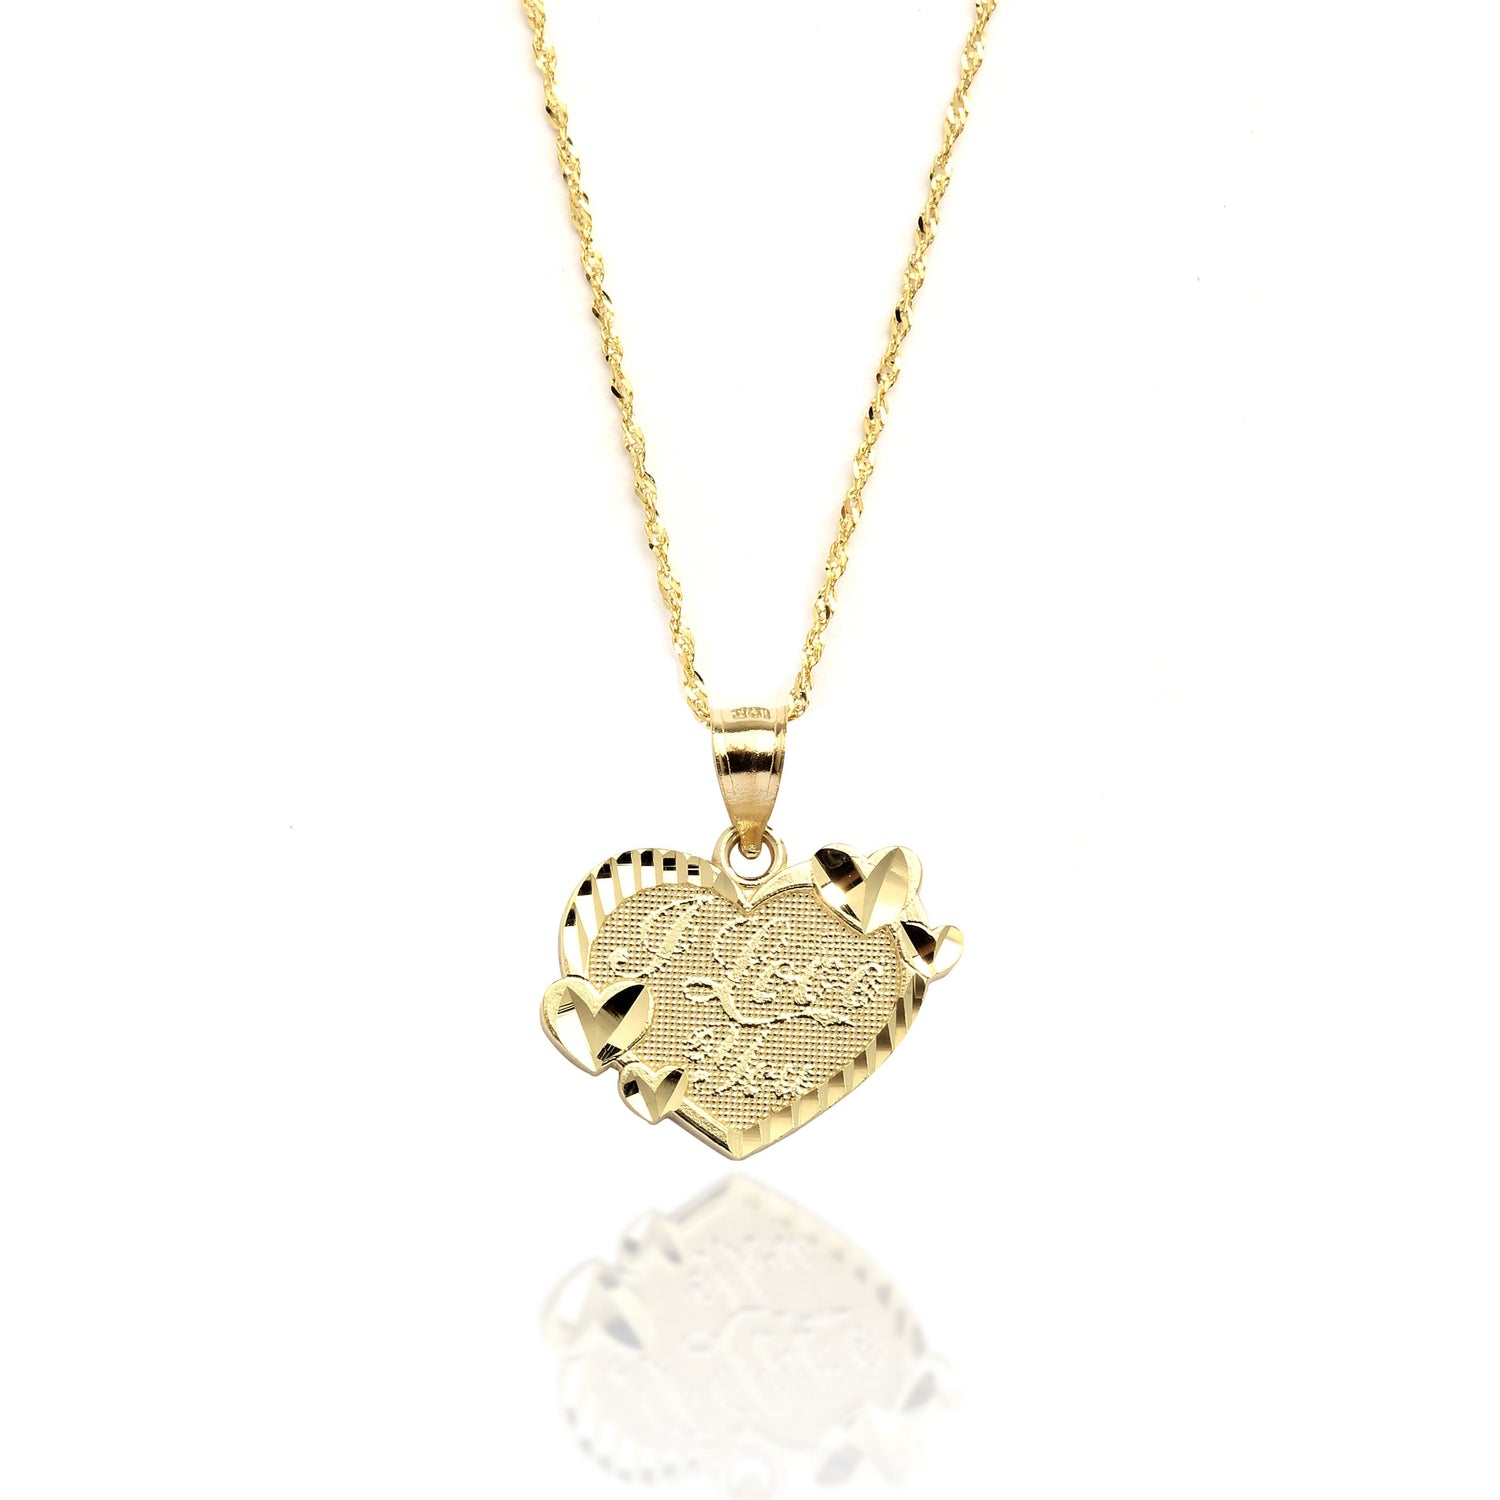 10k Yellow Gold I Love You Heart Pendant Necklace for Women and Girls